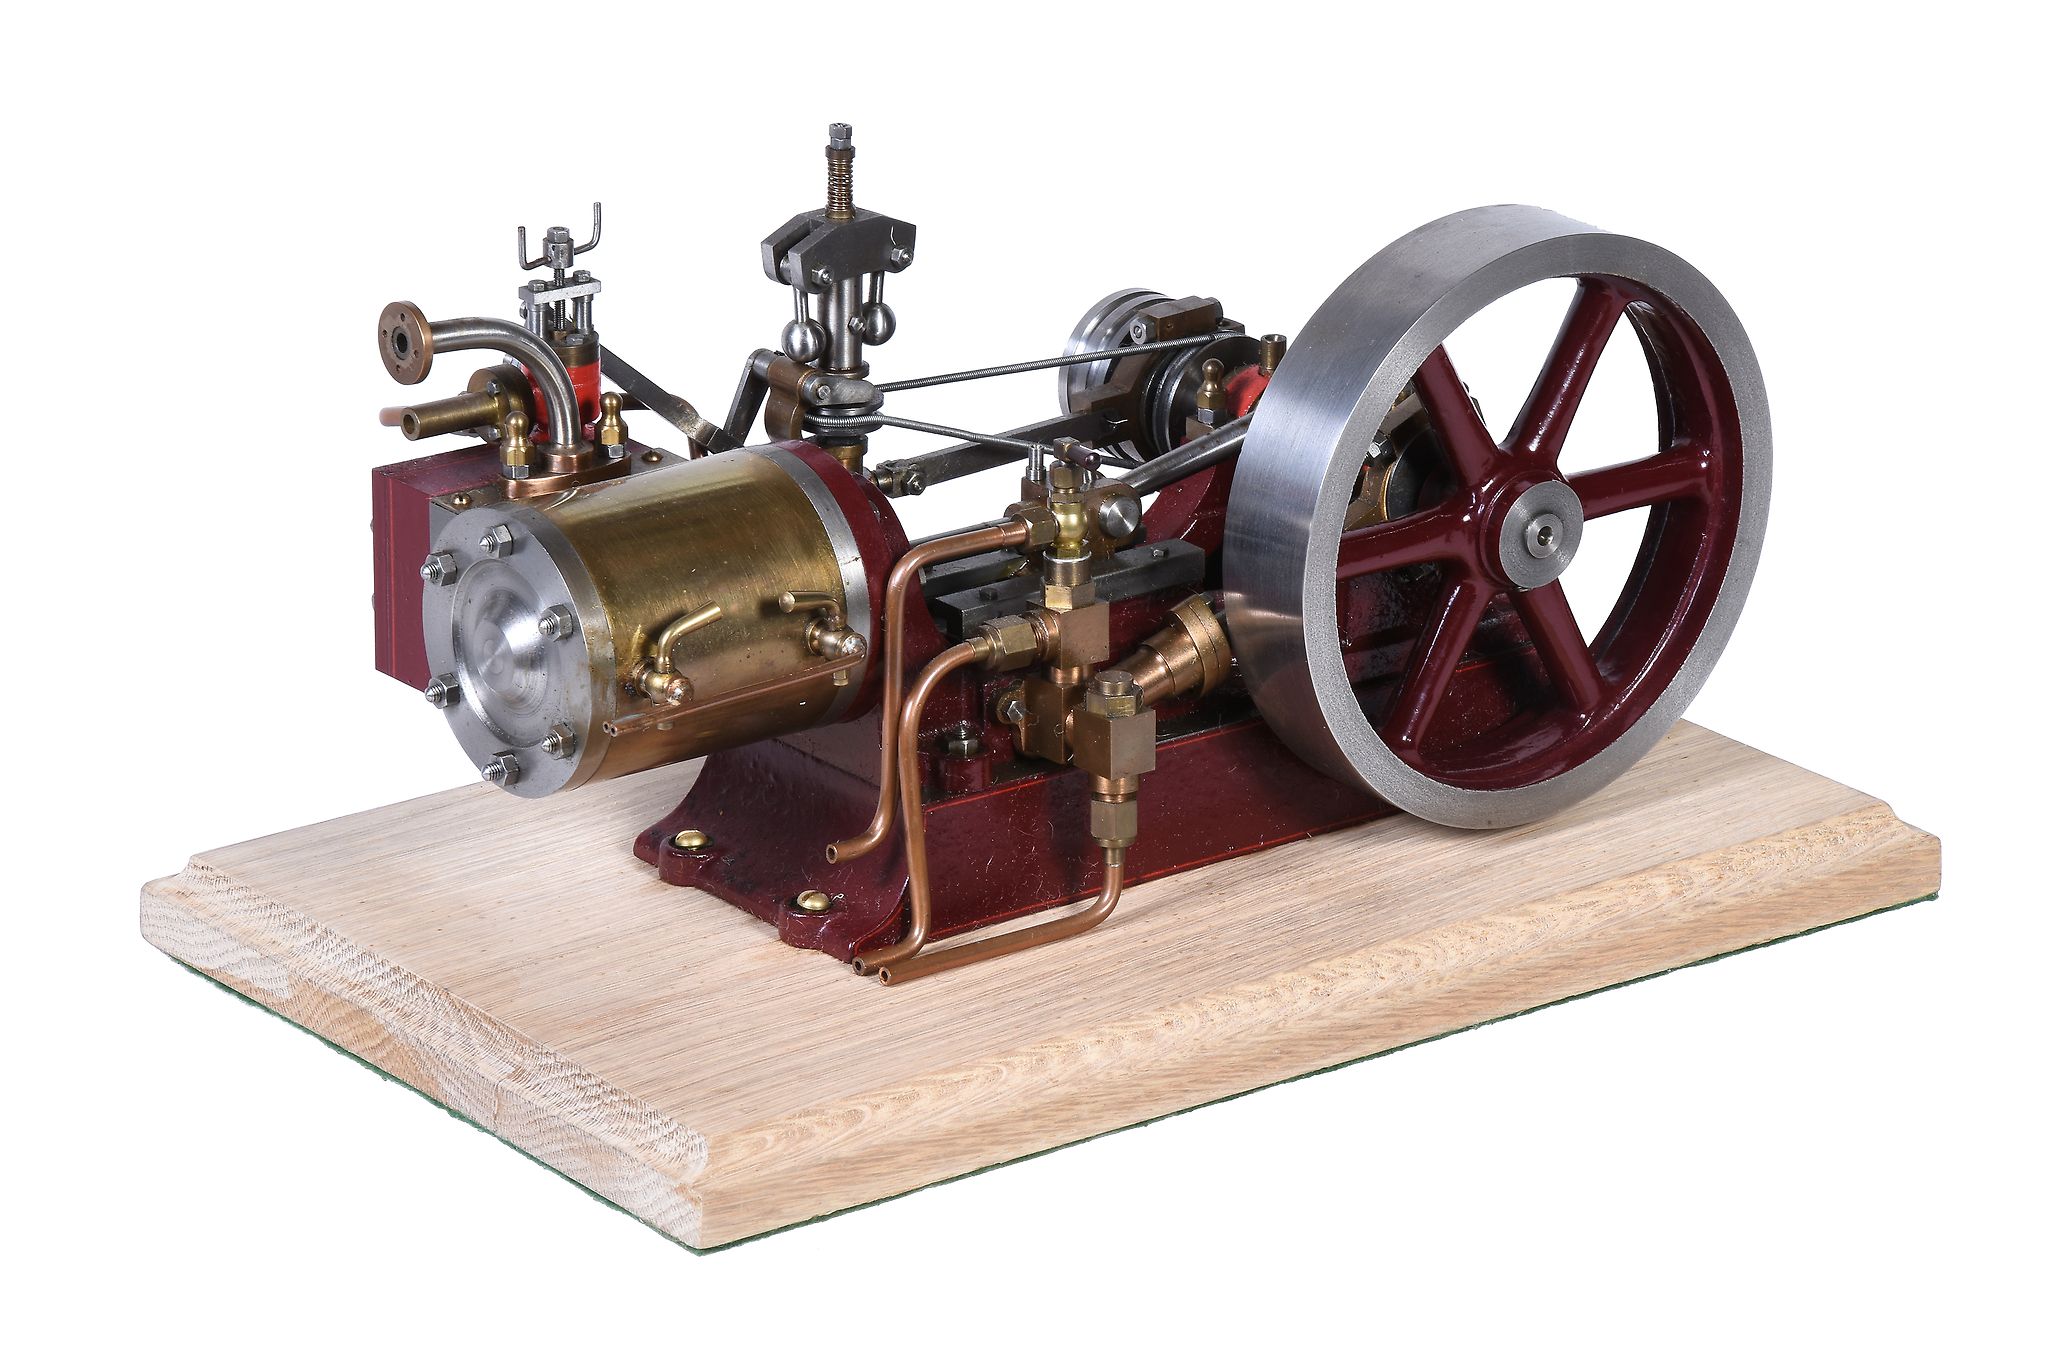 A very well engineered model of a Stuart Turner No 9 live steam horizontal mill engine, having